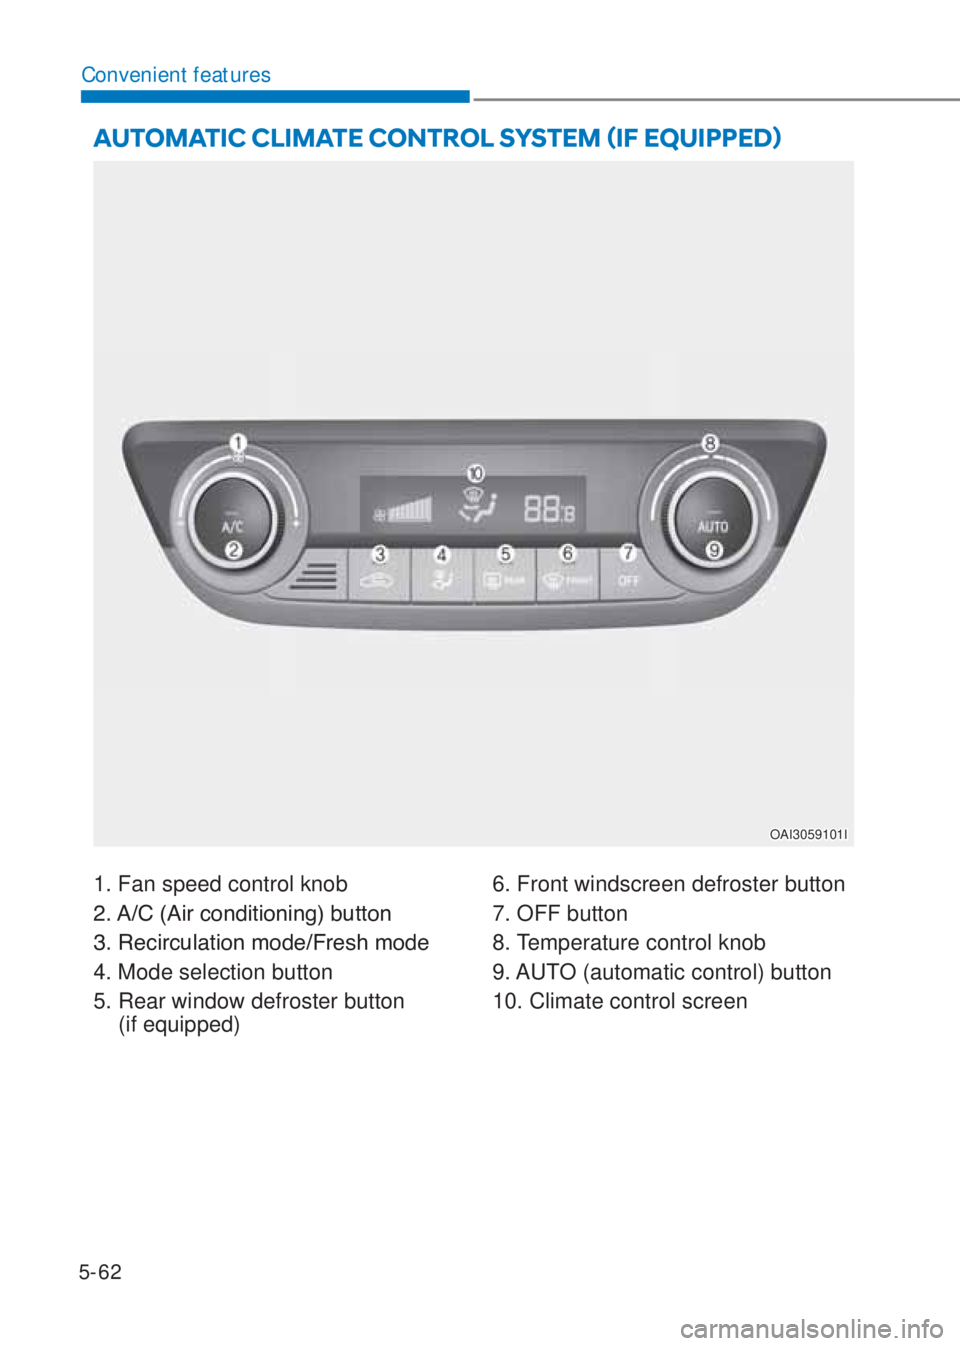 HYUNDAI I10 2022  Owners Manual 5-62
Convenient features
AUTOMATIC CLIMATE CONTROL SYSTEM ãIF EQUIPPEDä
OAI3059101I
1. Fan speed control knob
����$��&���$�L�U��F�R�Q�G�L�W�L�R�Q�L�Q�J���E�X�W�W�R�Q
����5�H�F�L�U�F�X�